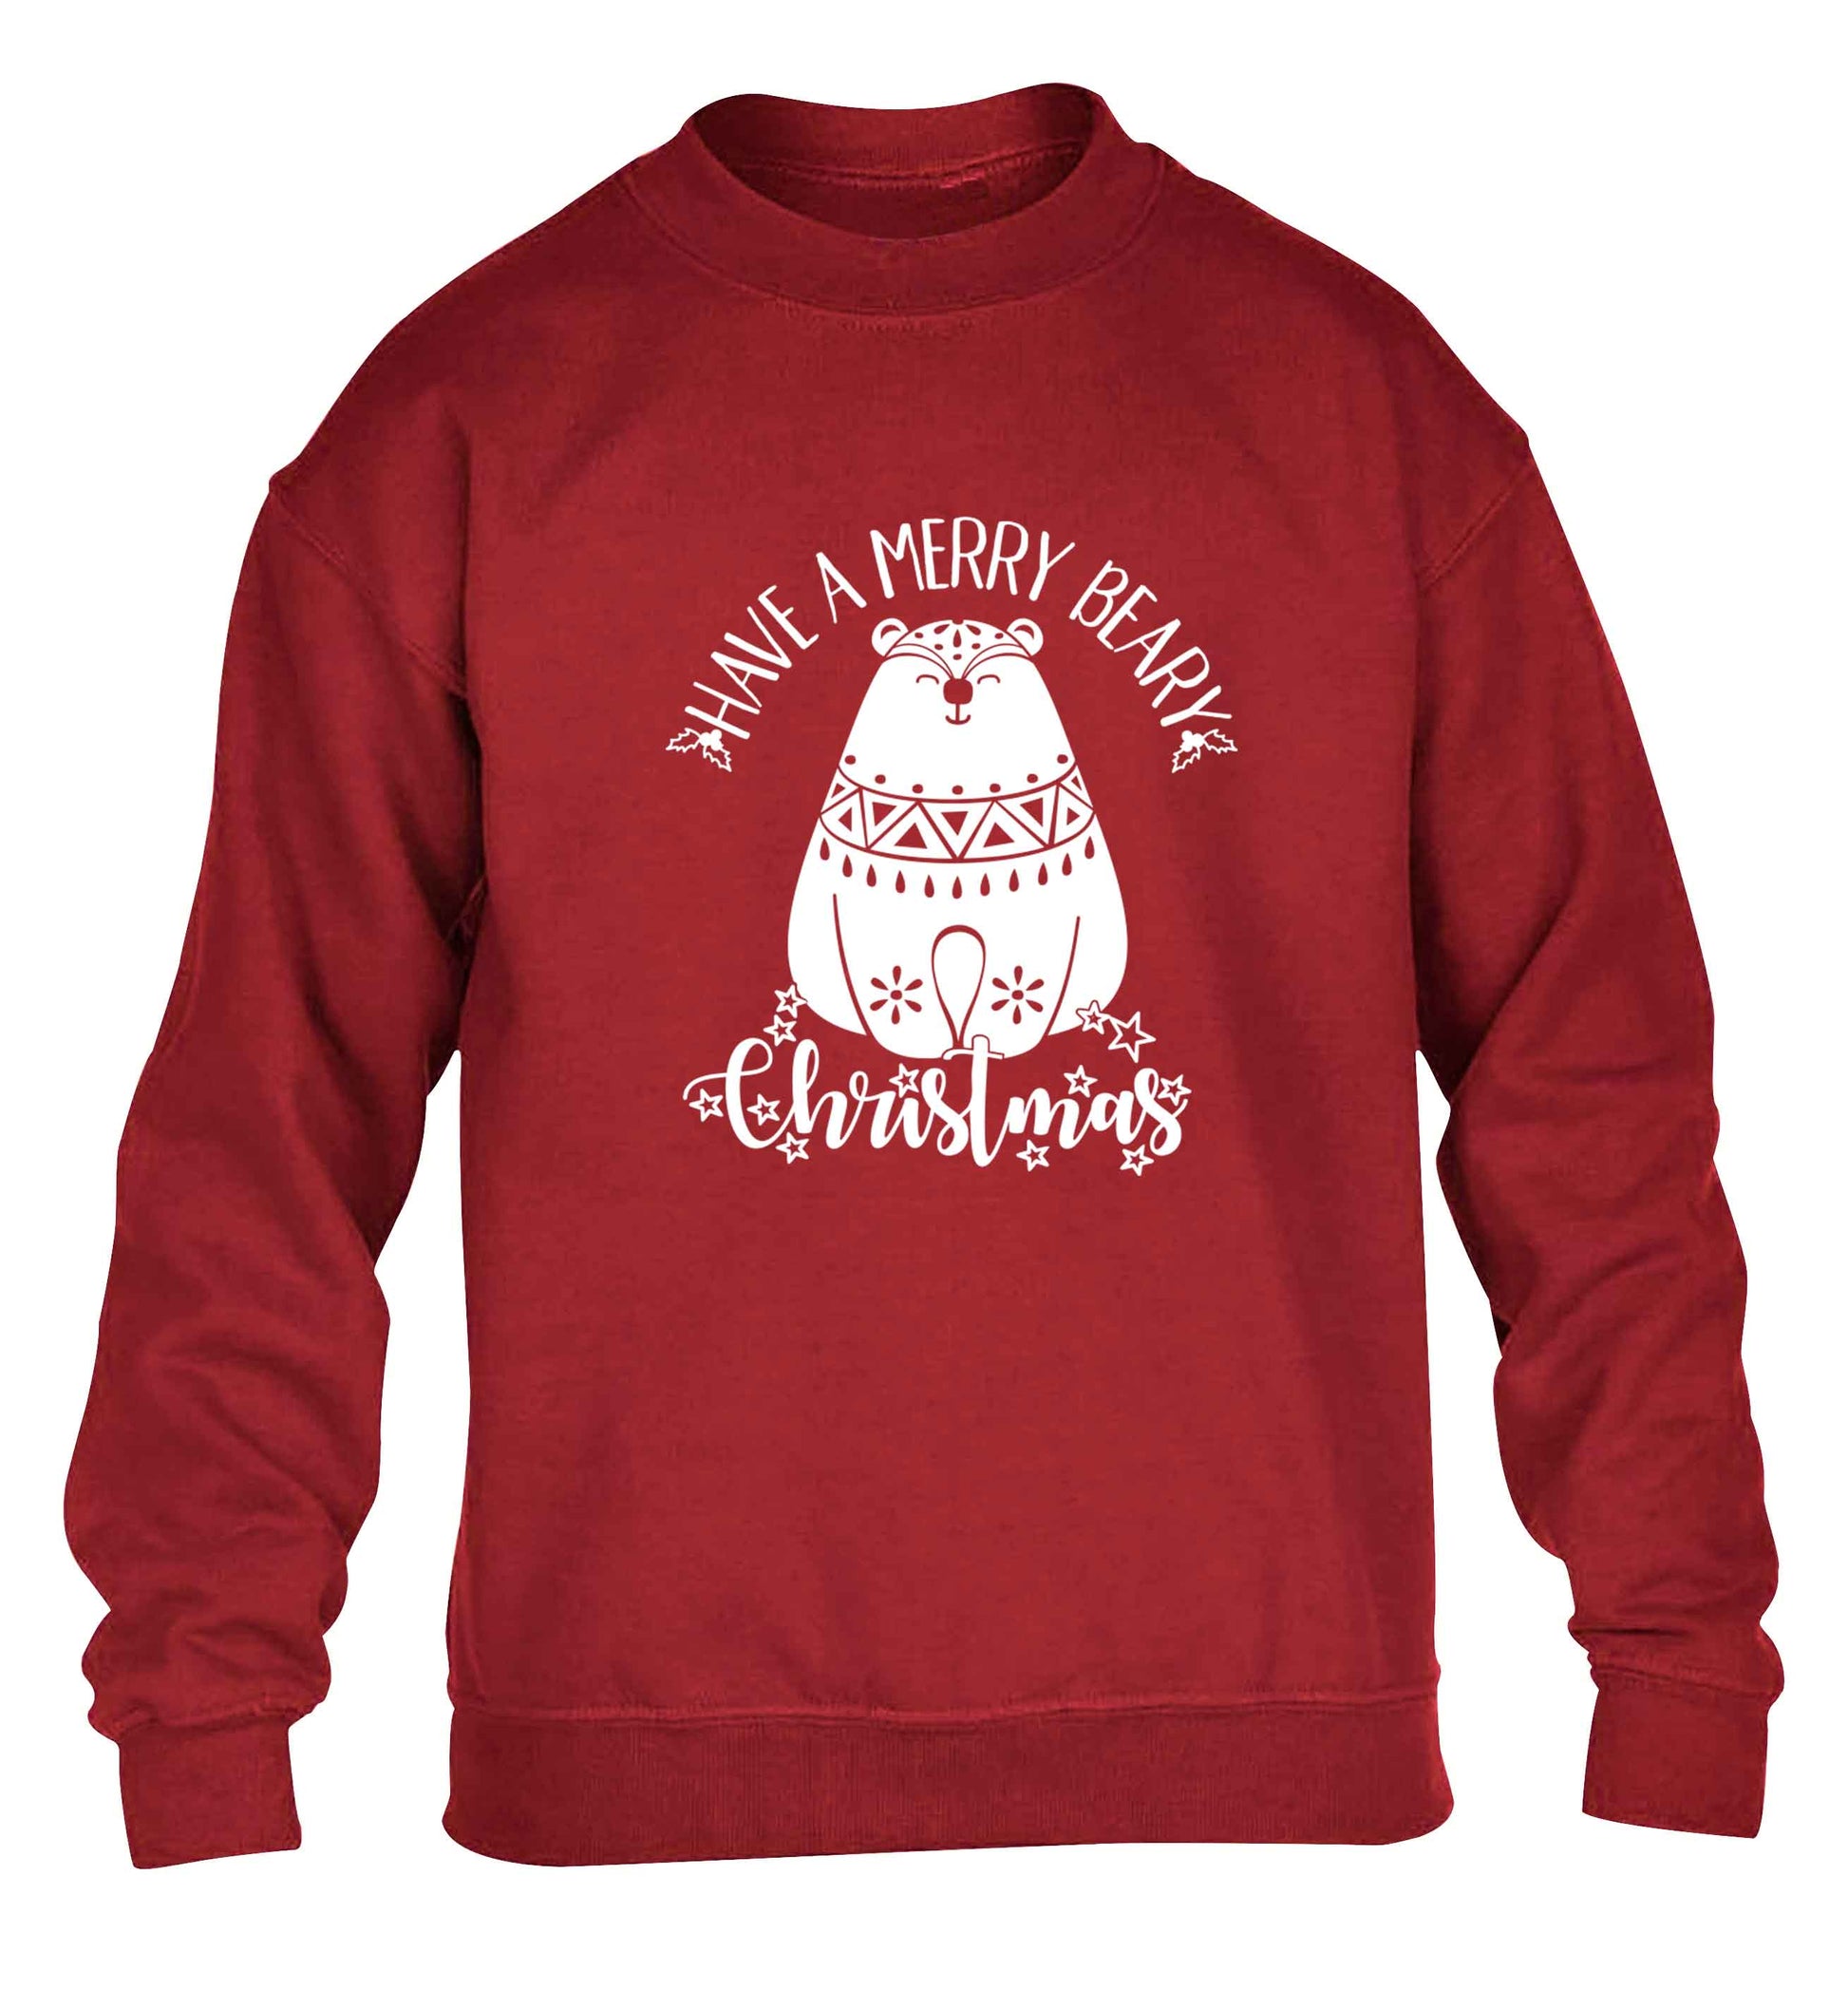 Have a merry beary Christmas children's grey sweater 12-13 Years